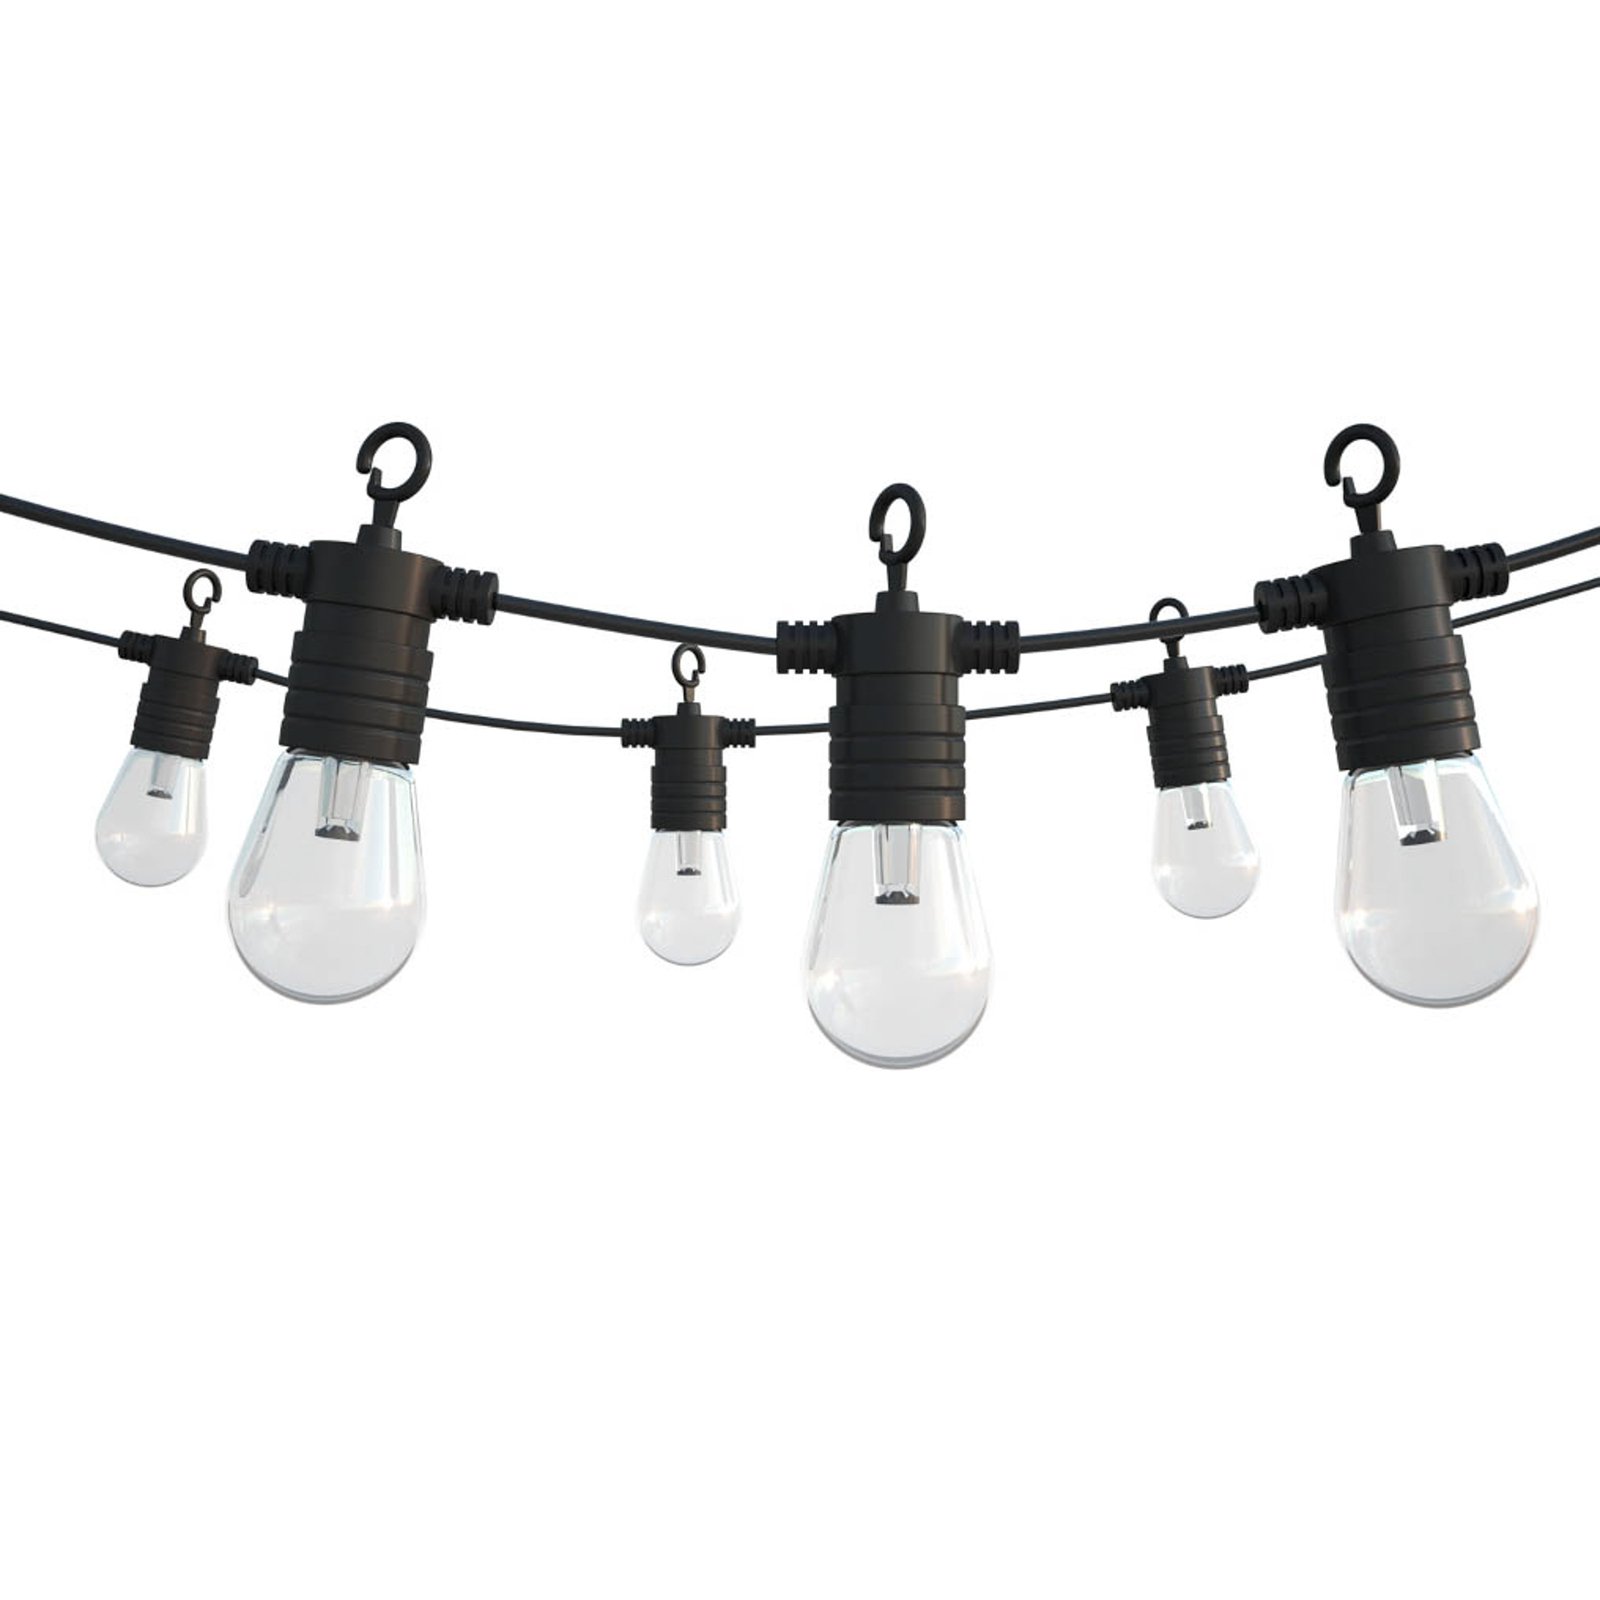 Calex Smart Outdoor Partystring fairy lights, RGBW